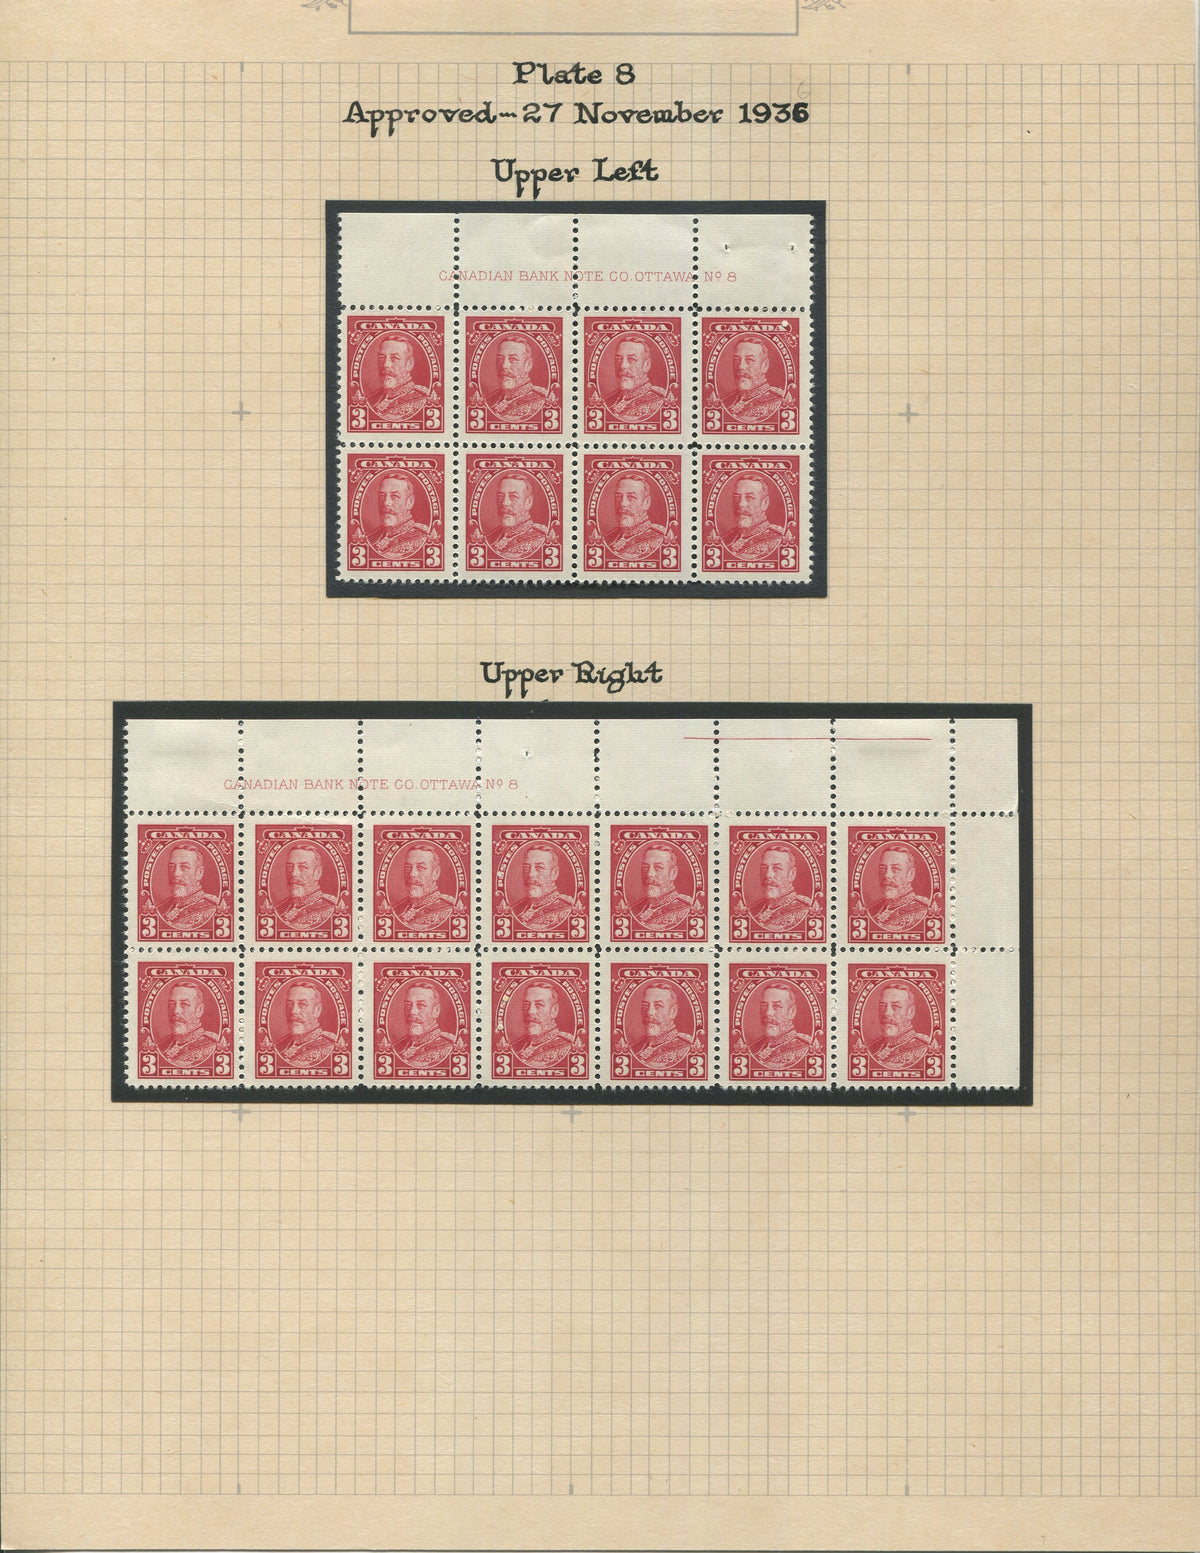 0219CA2209 - #219 Mint Plate Block Collection